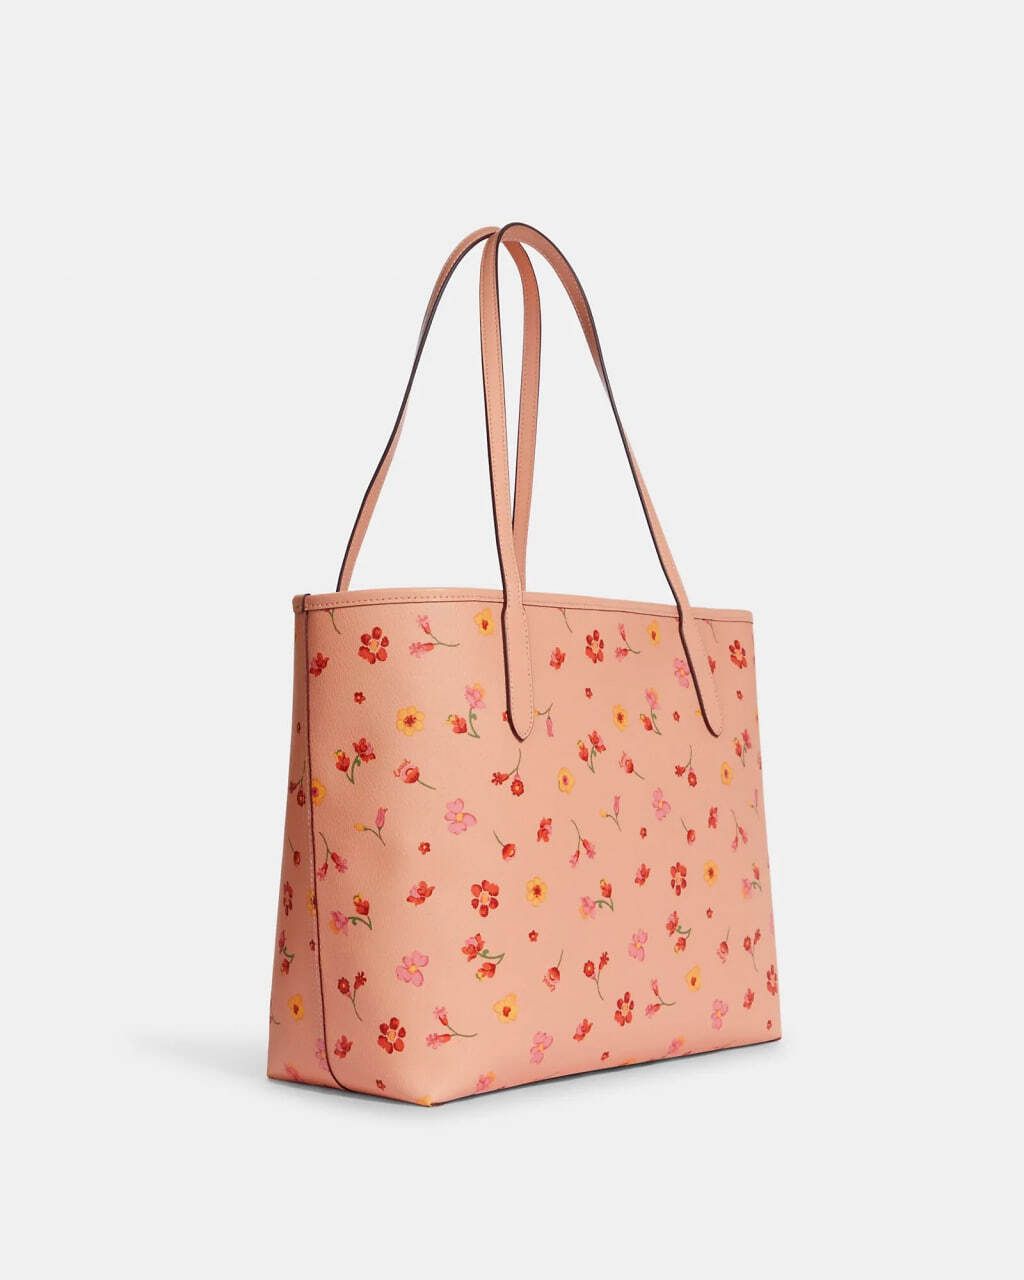 handbagbranded.com getlush outlet personalshopper usa Coach malaysia ready stock Coach City Tote With Mystical Floral Print in Faded Blush Multi 1